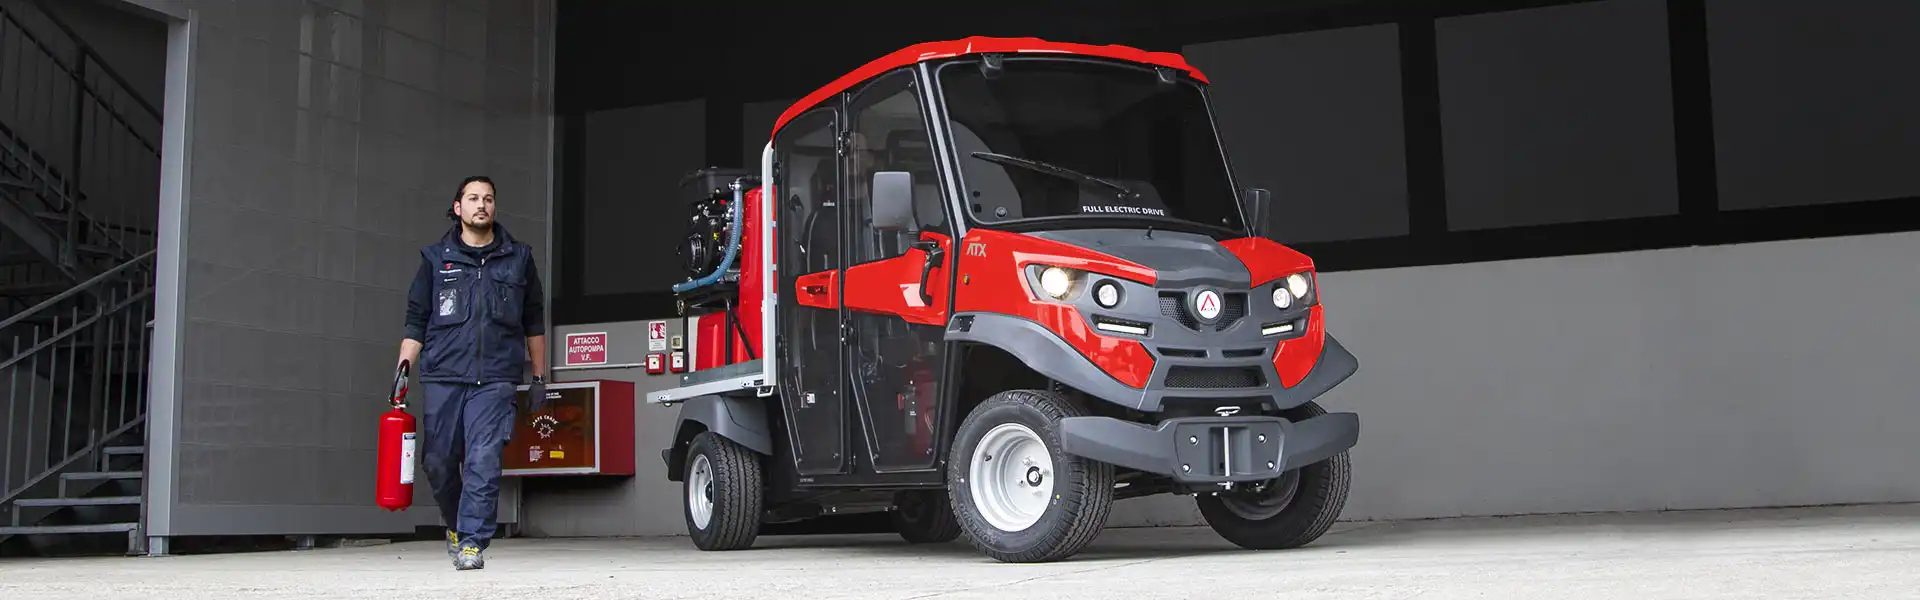 ALKE' Firefighter utility vehicles - Ready to action in case of fire